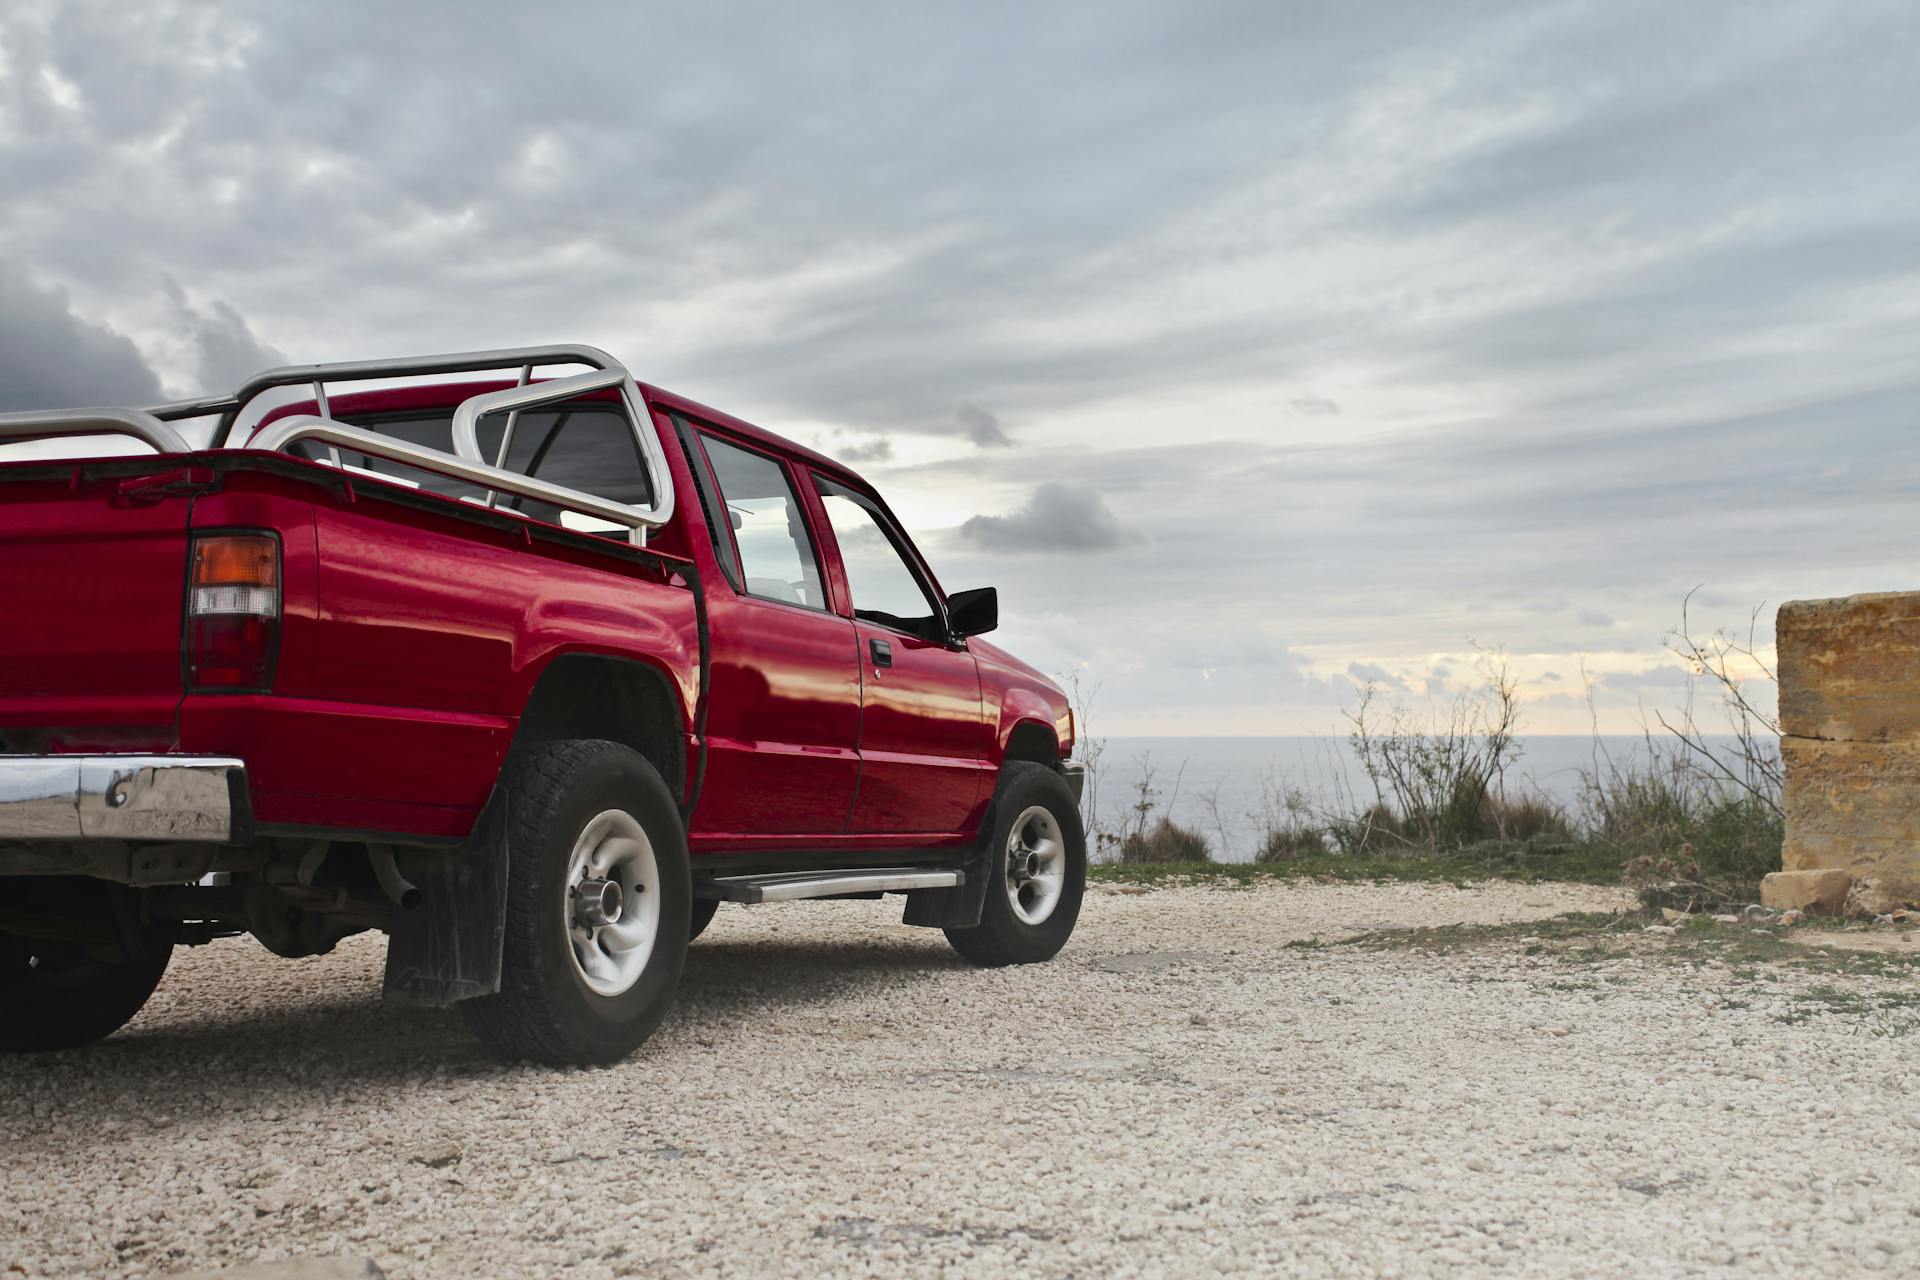 A red pickup truck | Source: Pexels